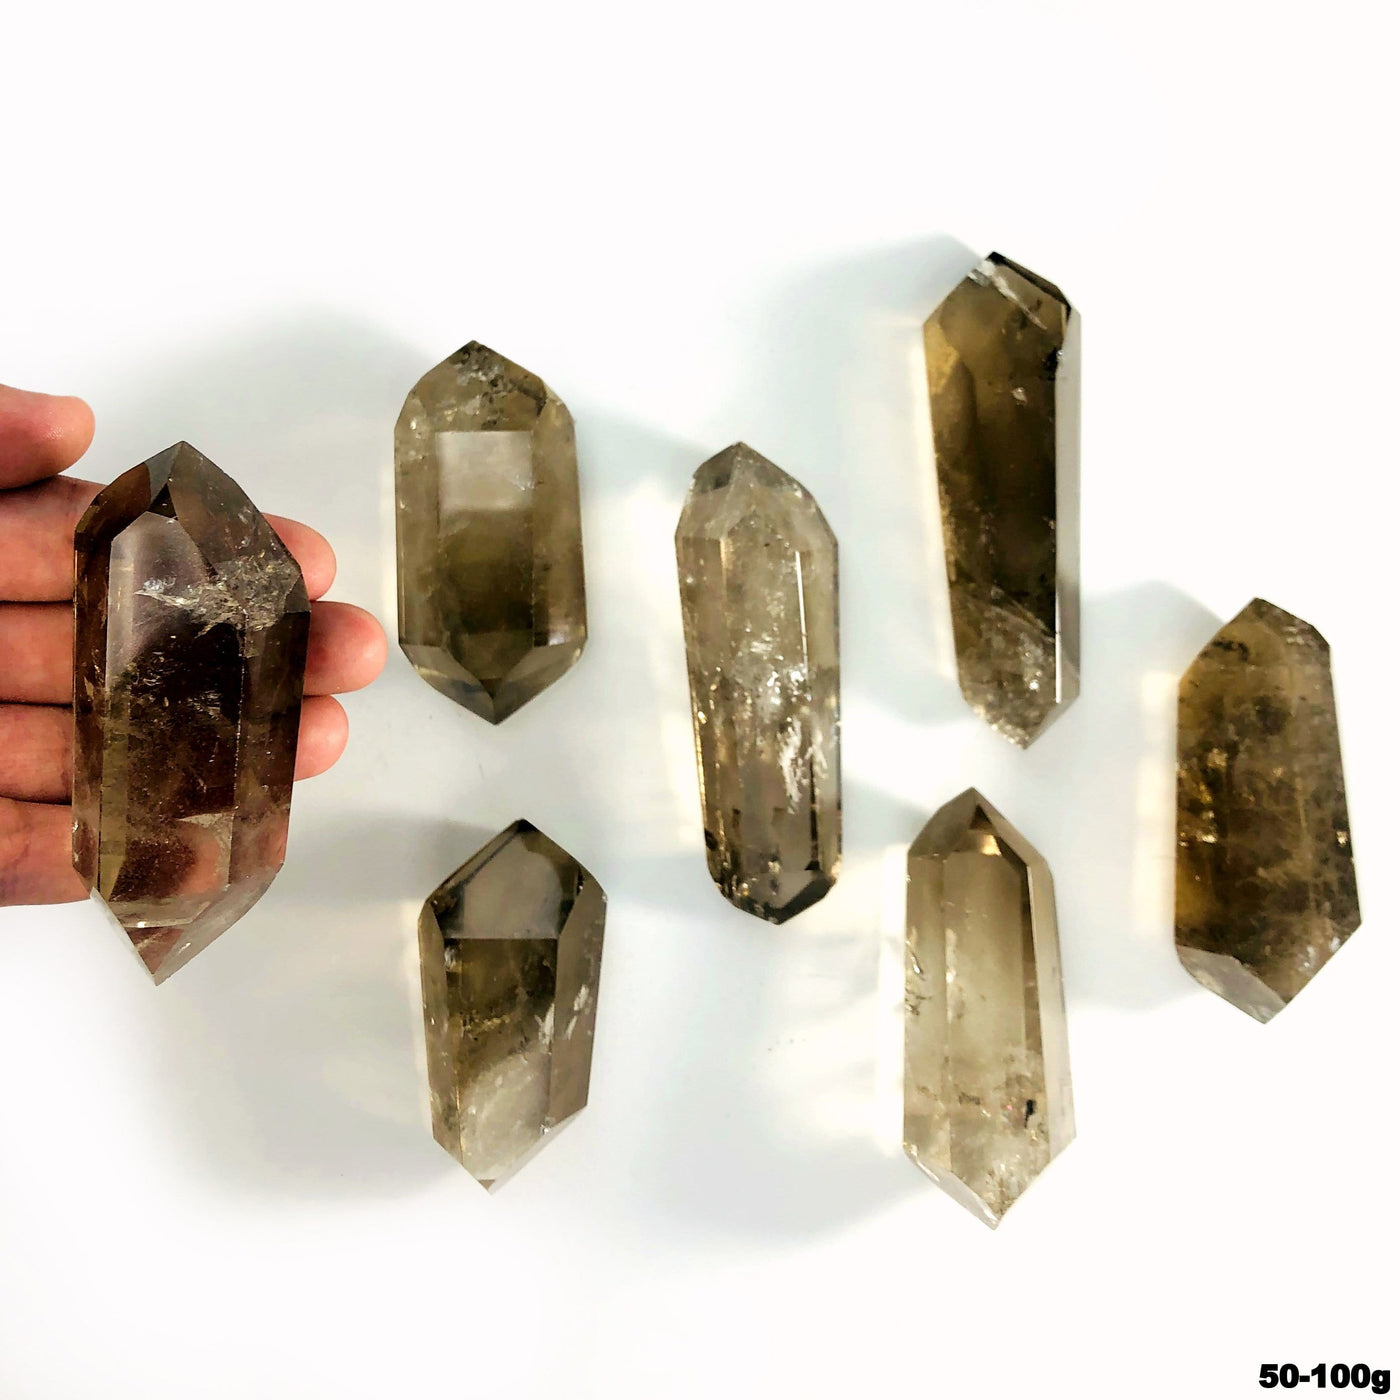 overhead view of many 50g - 100g smokey quartz double points on white backdrop with one in hand for size reference